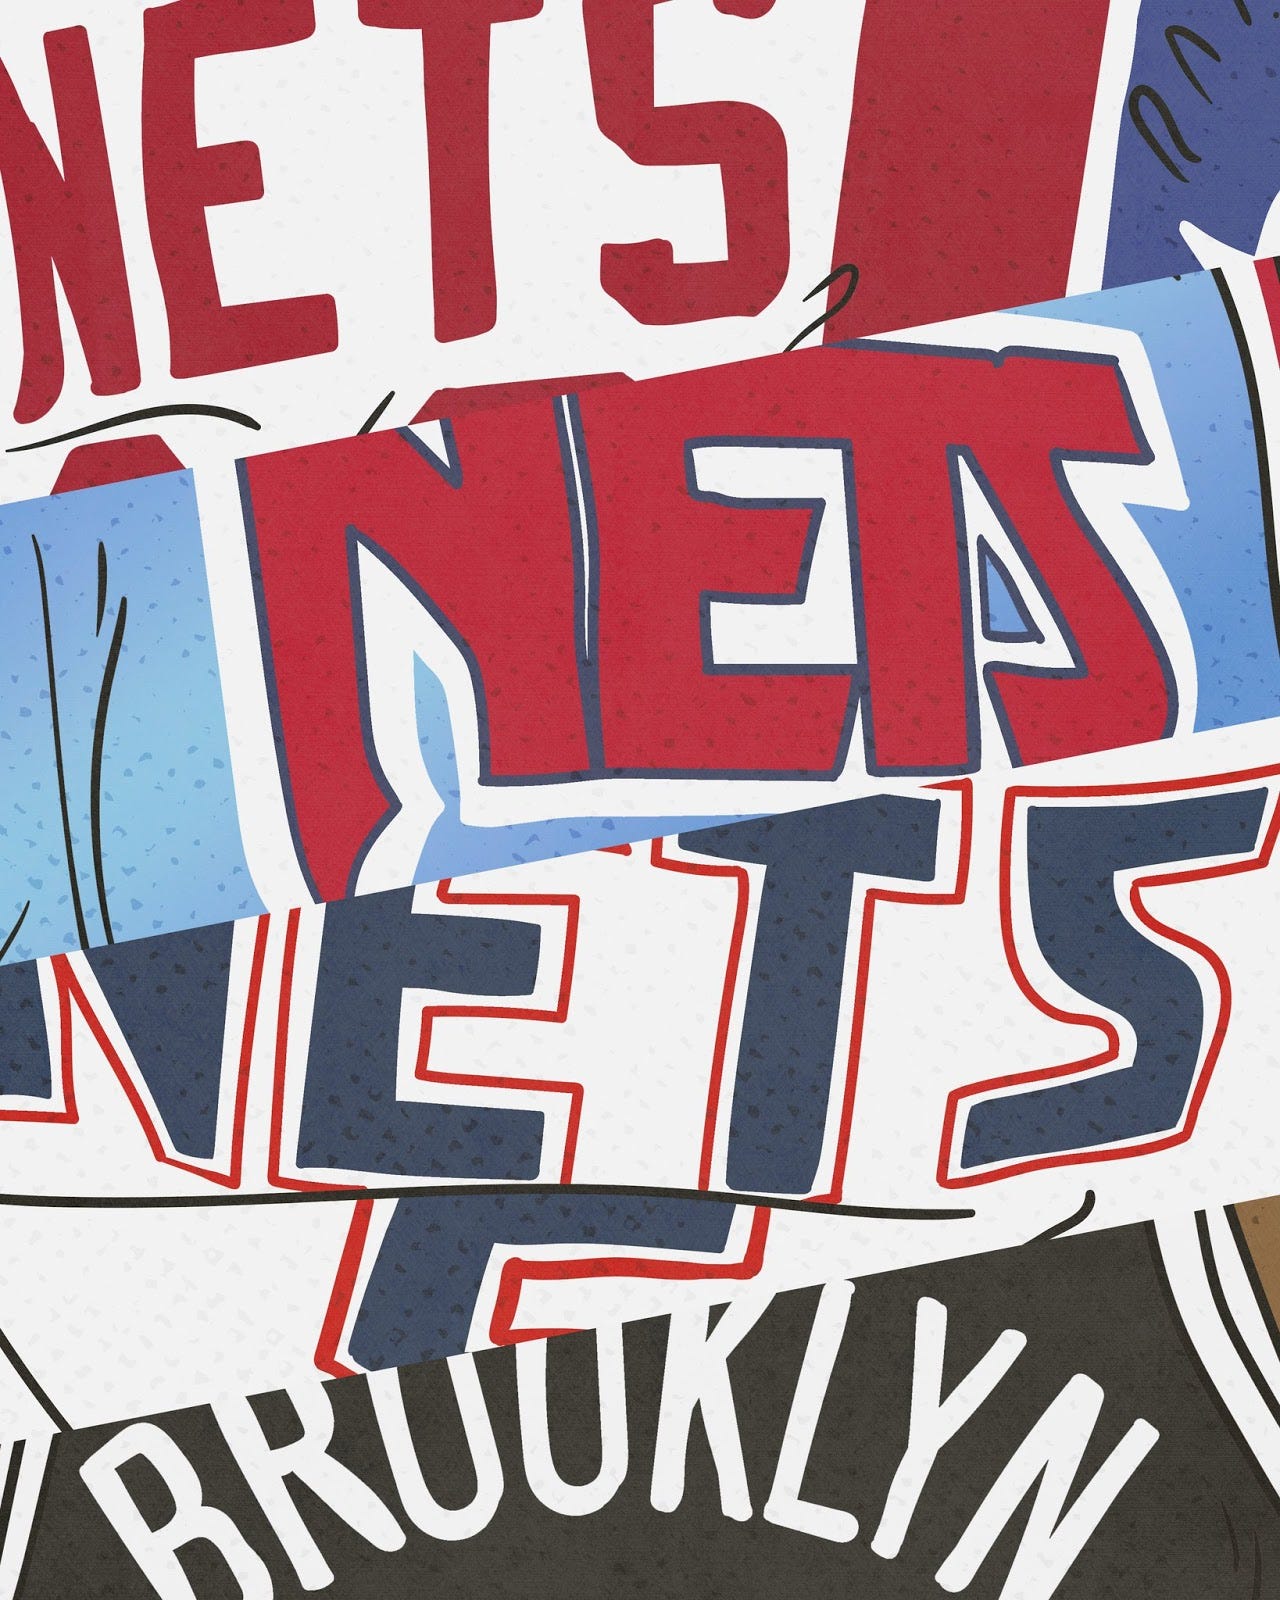 What's Up With These Wacky New Nets Jerseys?